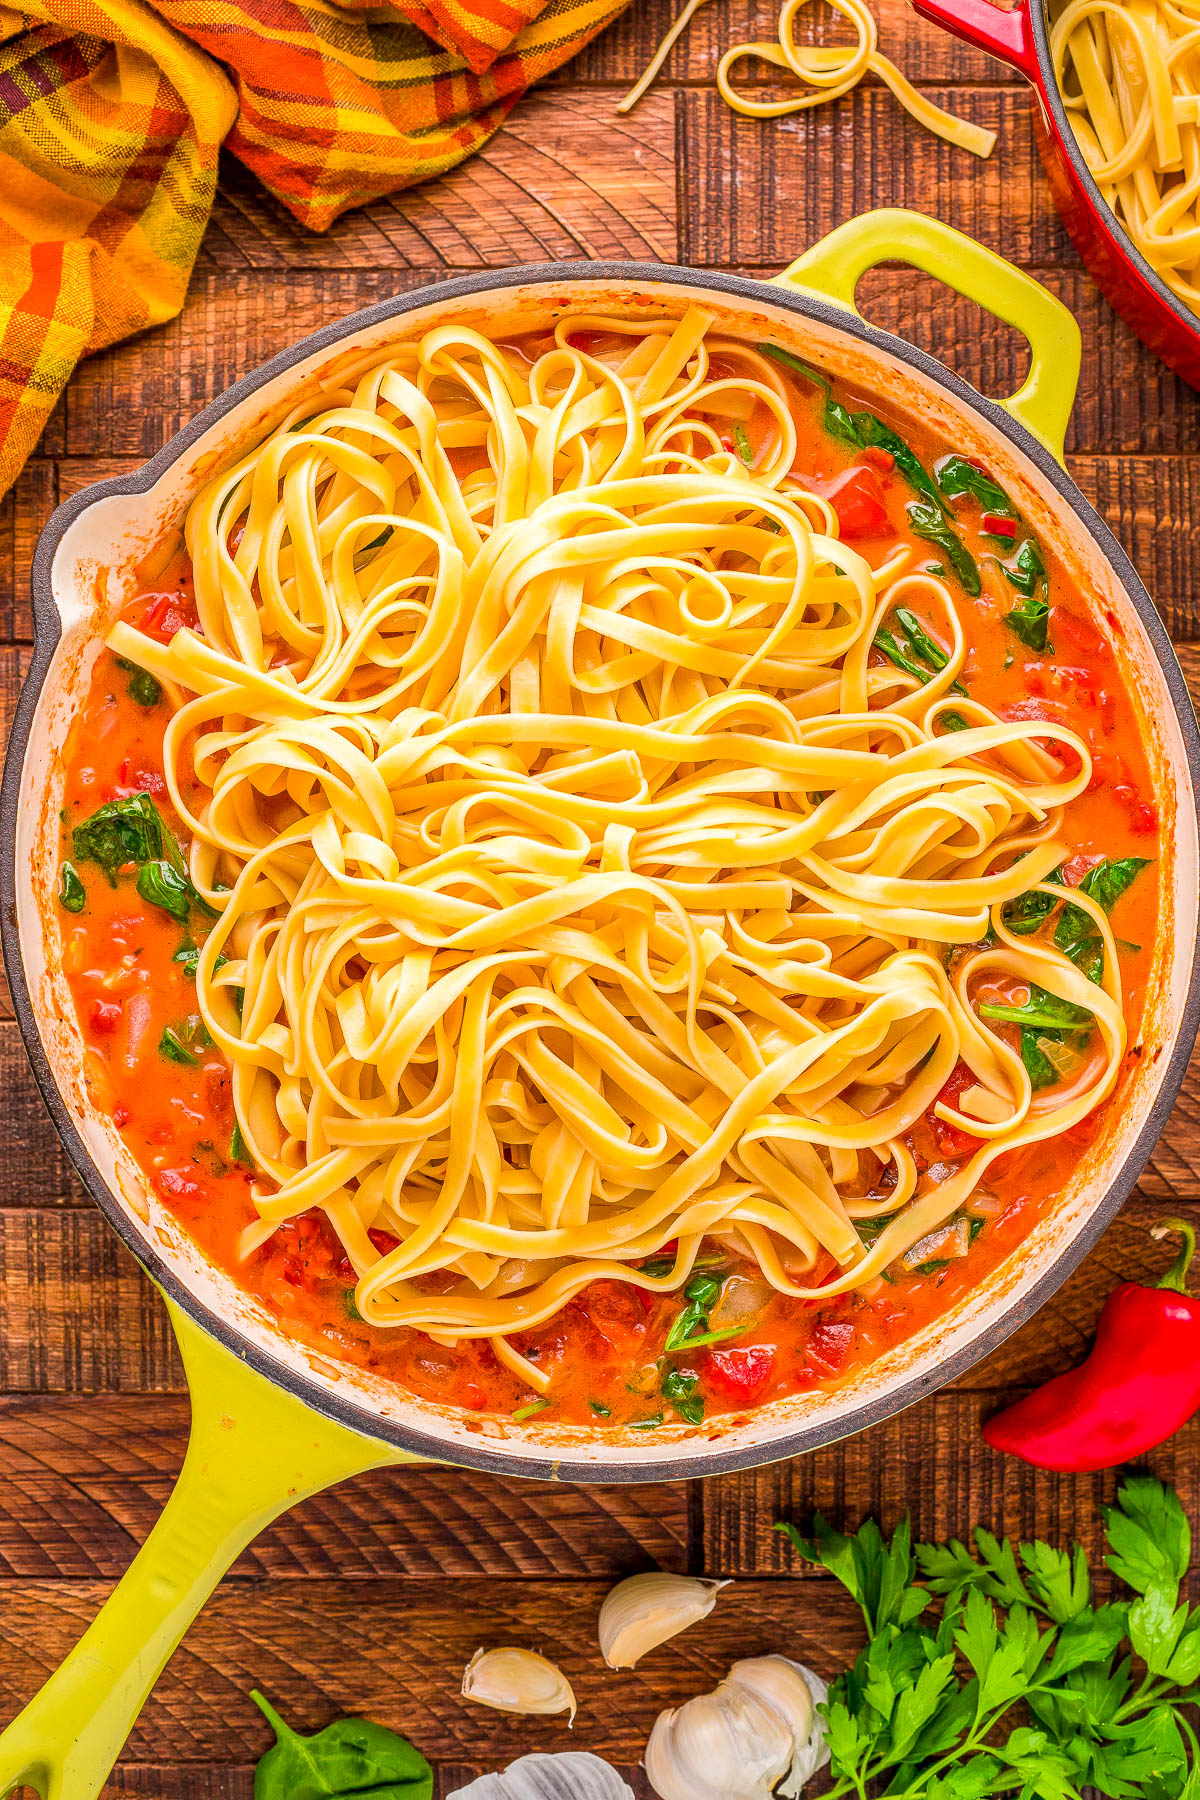 Pasta with Vodka Sauce - Make an Italian restaurant-worthy pasta dish EASILY at home in 30 minutes! Pasta is tossed in a tomato-forward sauce that includes red pepper flakes, onions, garlic, spinach, heavy cream for RICHNESS and of course, vodka! A family FAVORITE comfort food classic recipe that's doable for busy weeknights, for entertaining, or for date night at home!